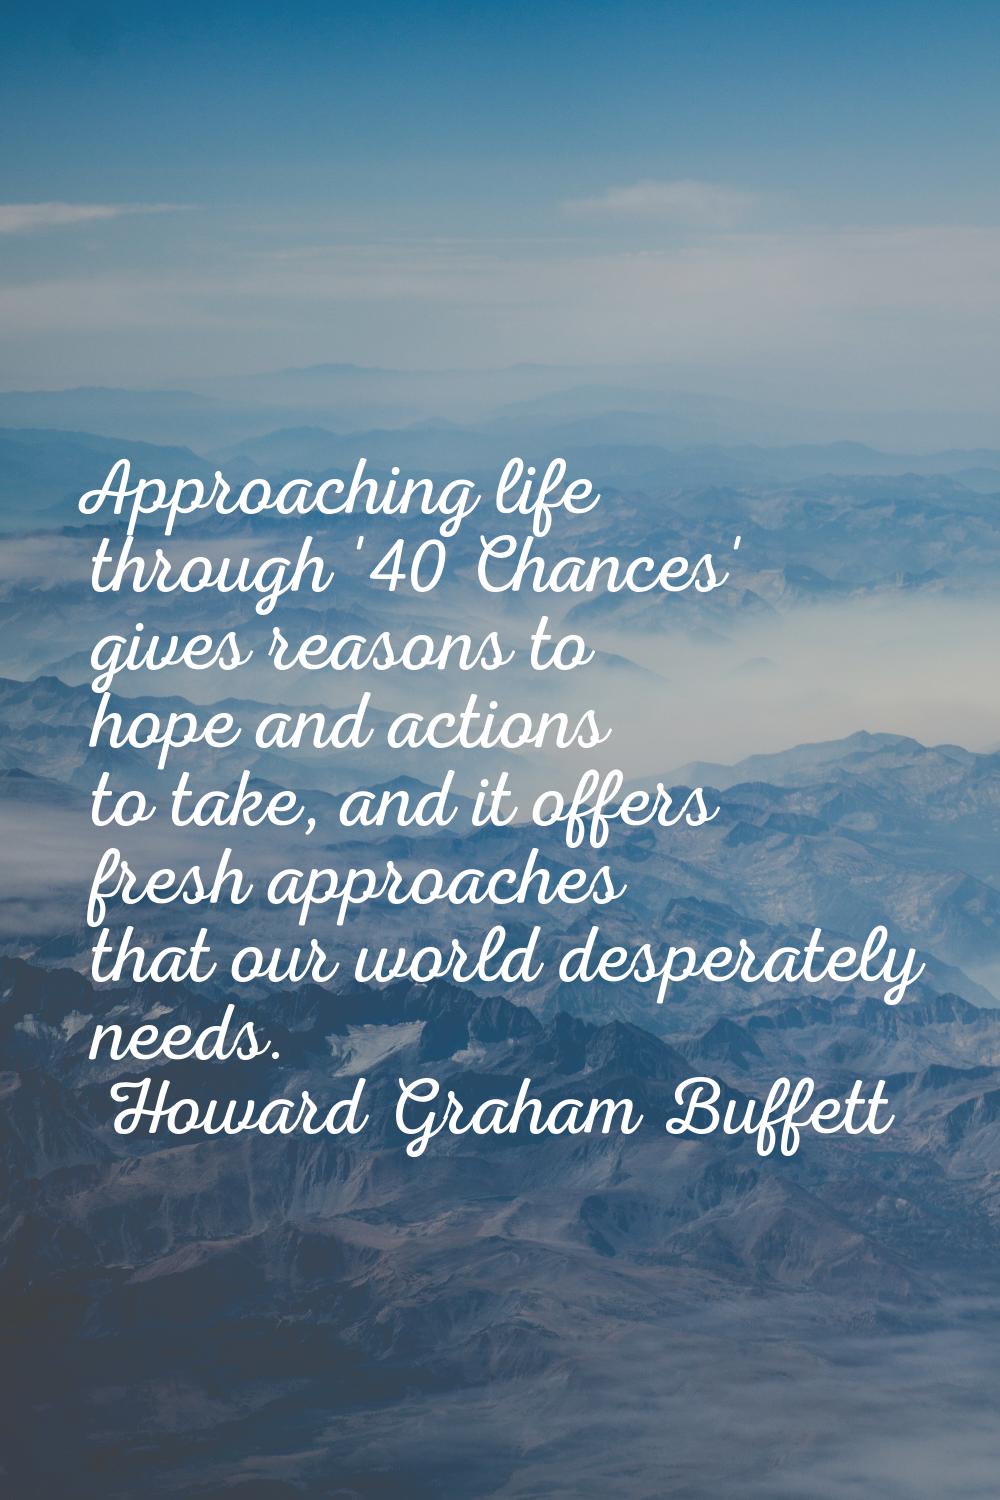 Approaching life through '40 Chances' gives reasons to hope and actions to take, and it offers fres